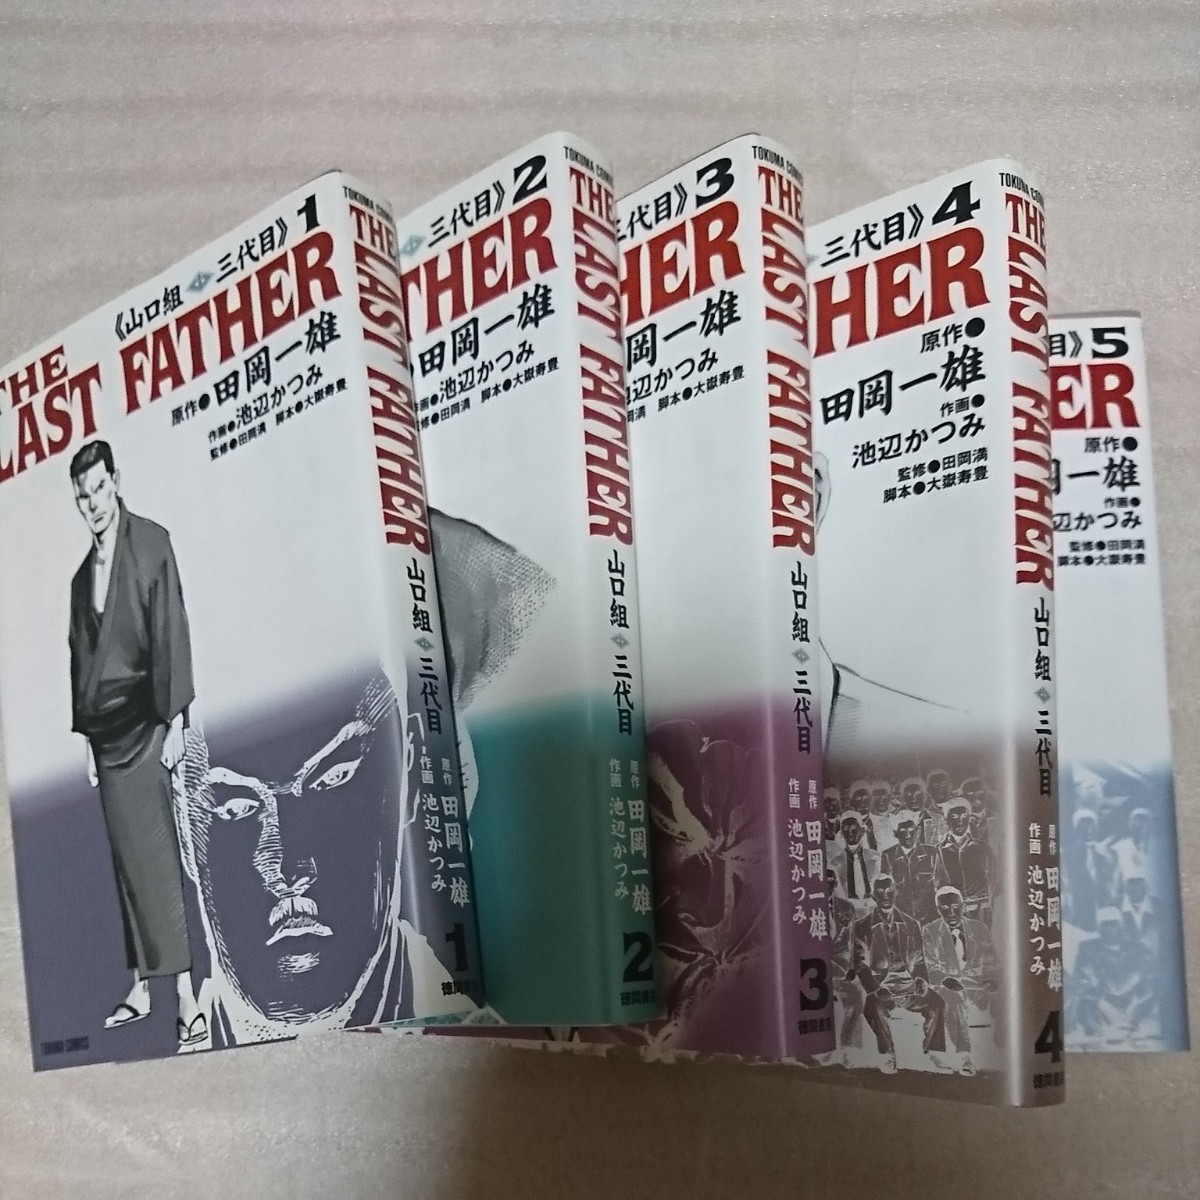 THE LAST FATHER 山口組 三代目 1巻～５巻 